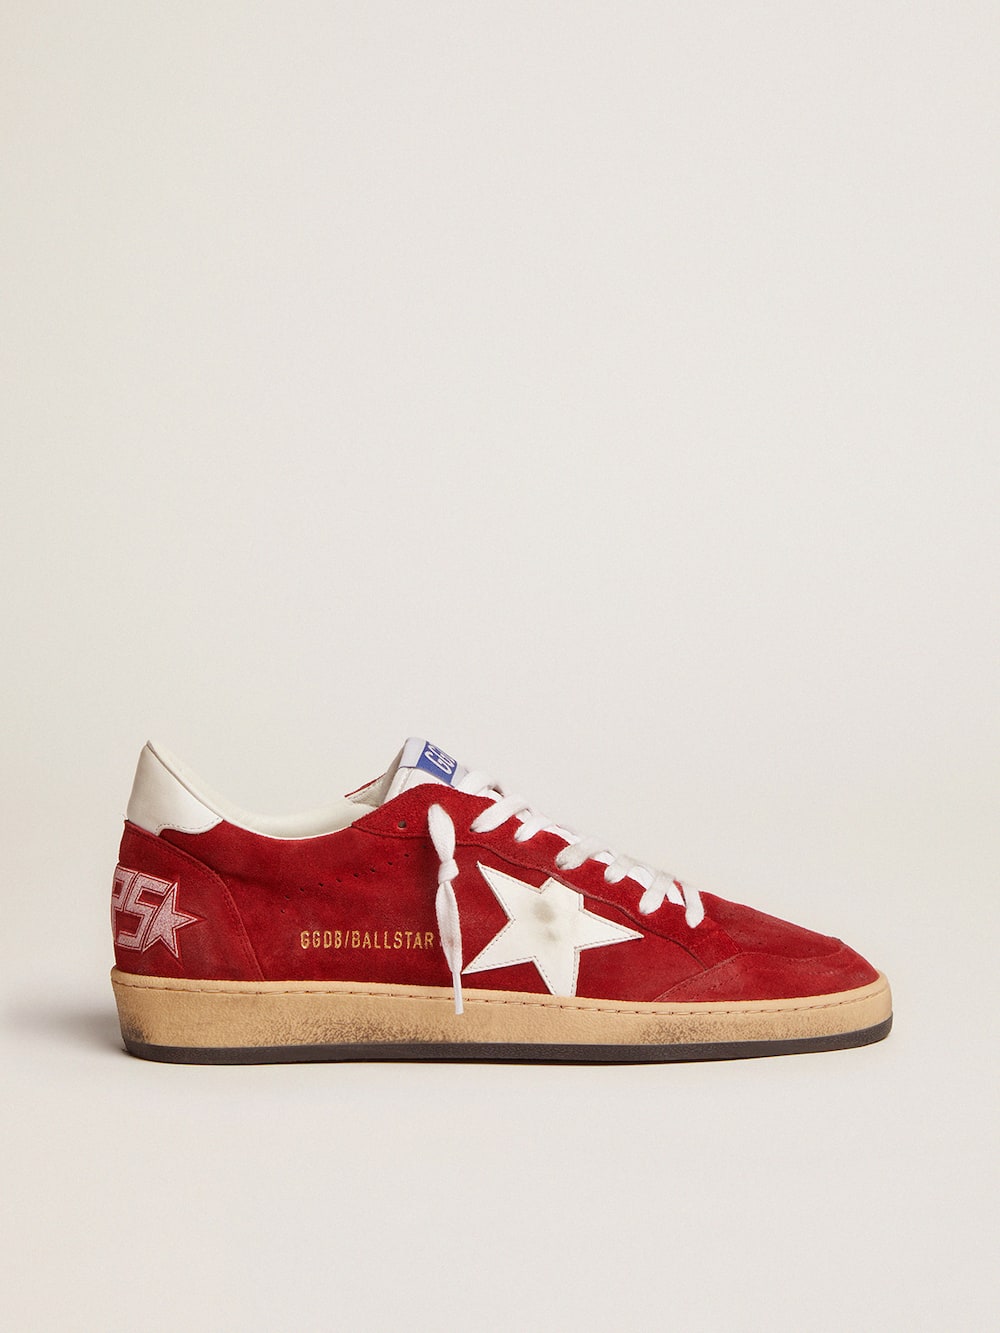 Golden Goose - Men's Ball Star in dark red suede with white star and heel tab in 